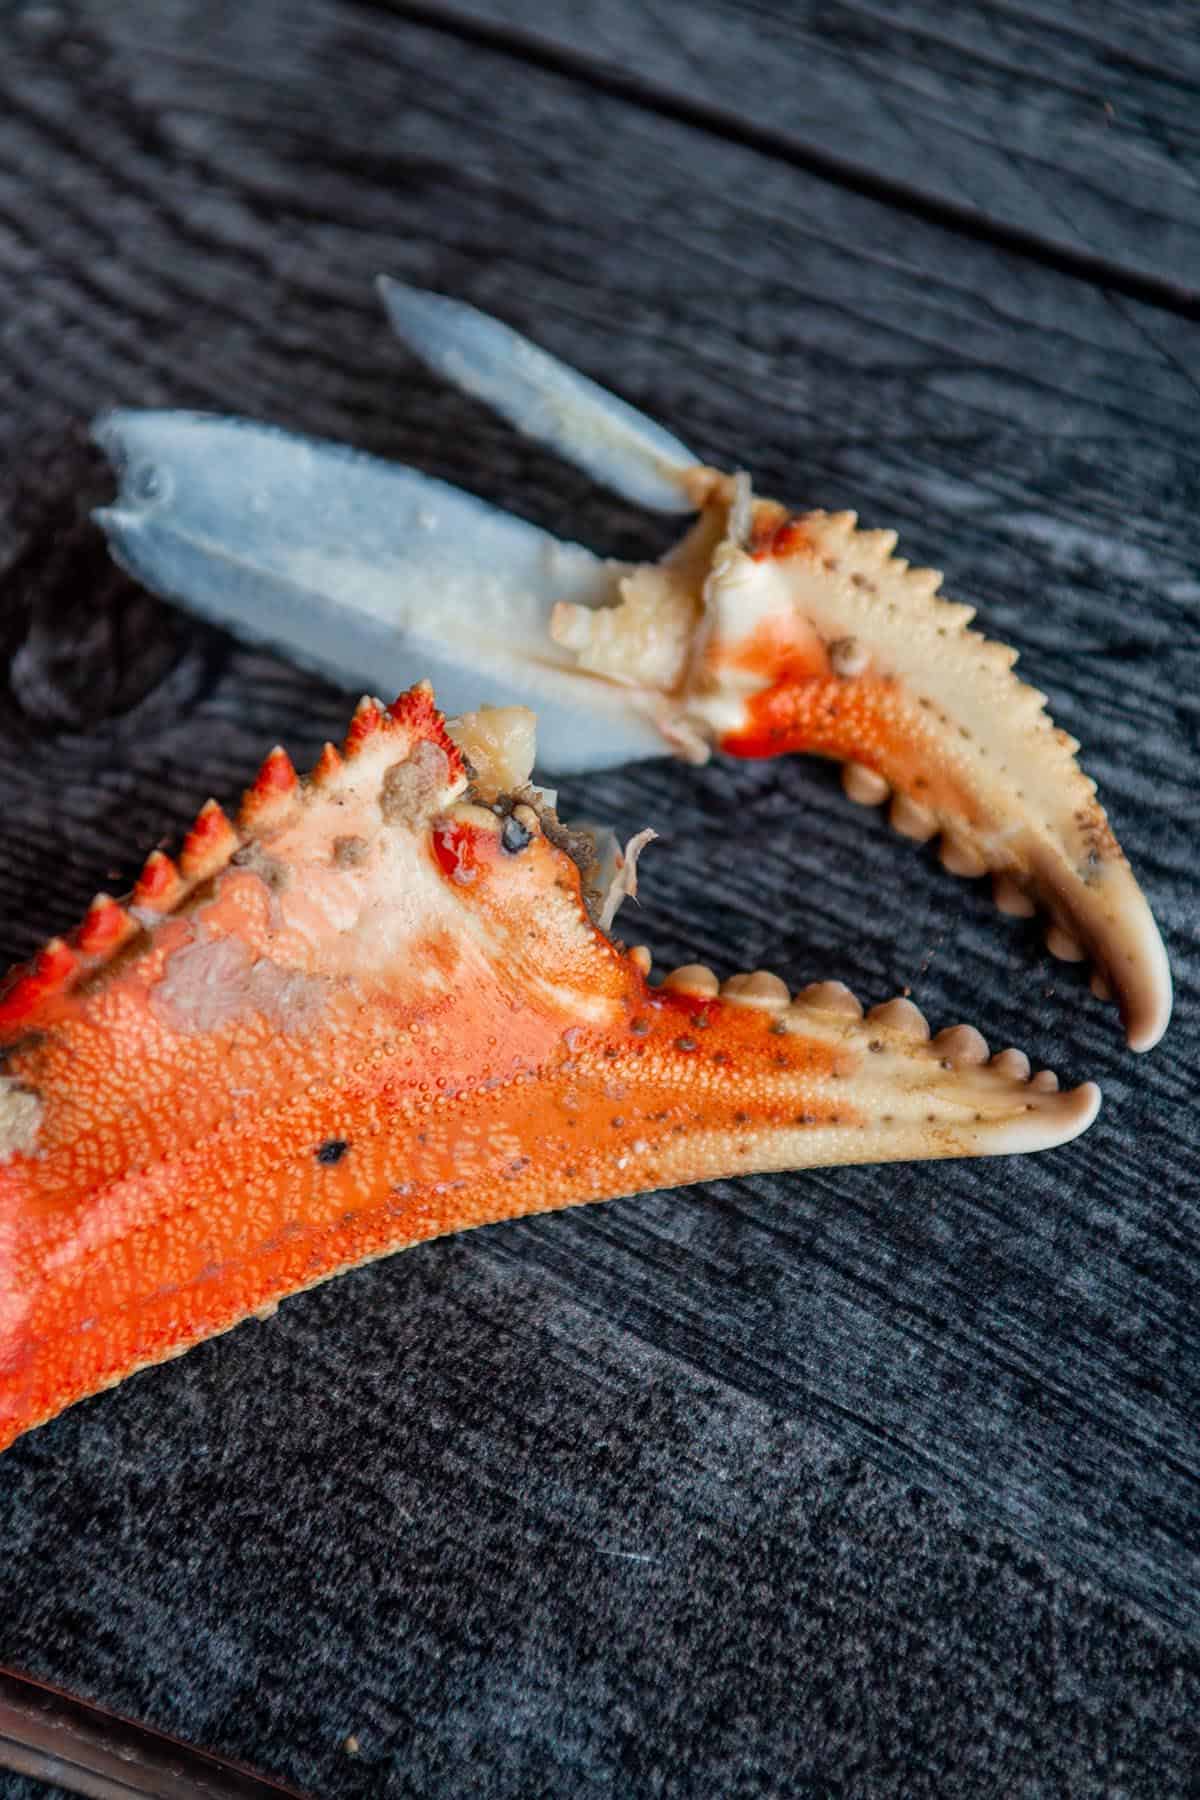 The claw of a Dungeness crab.